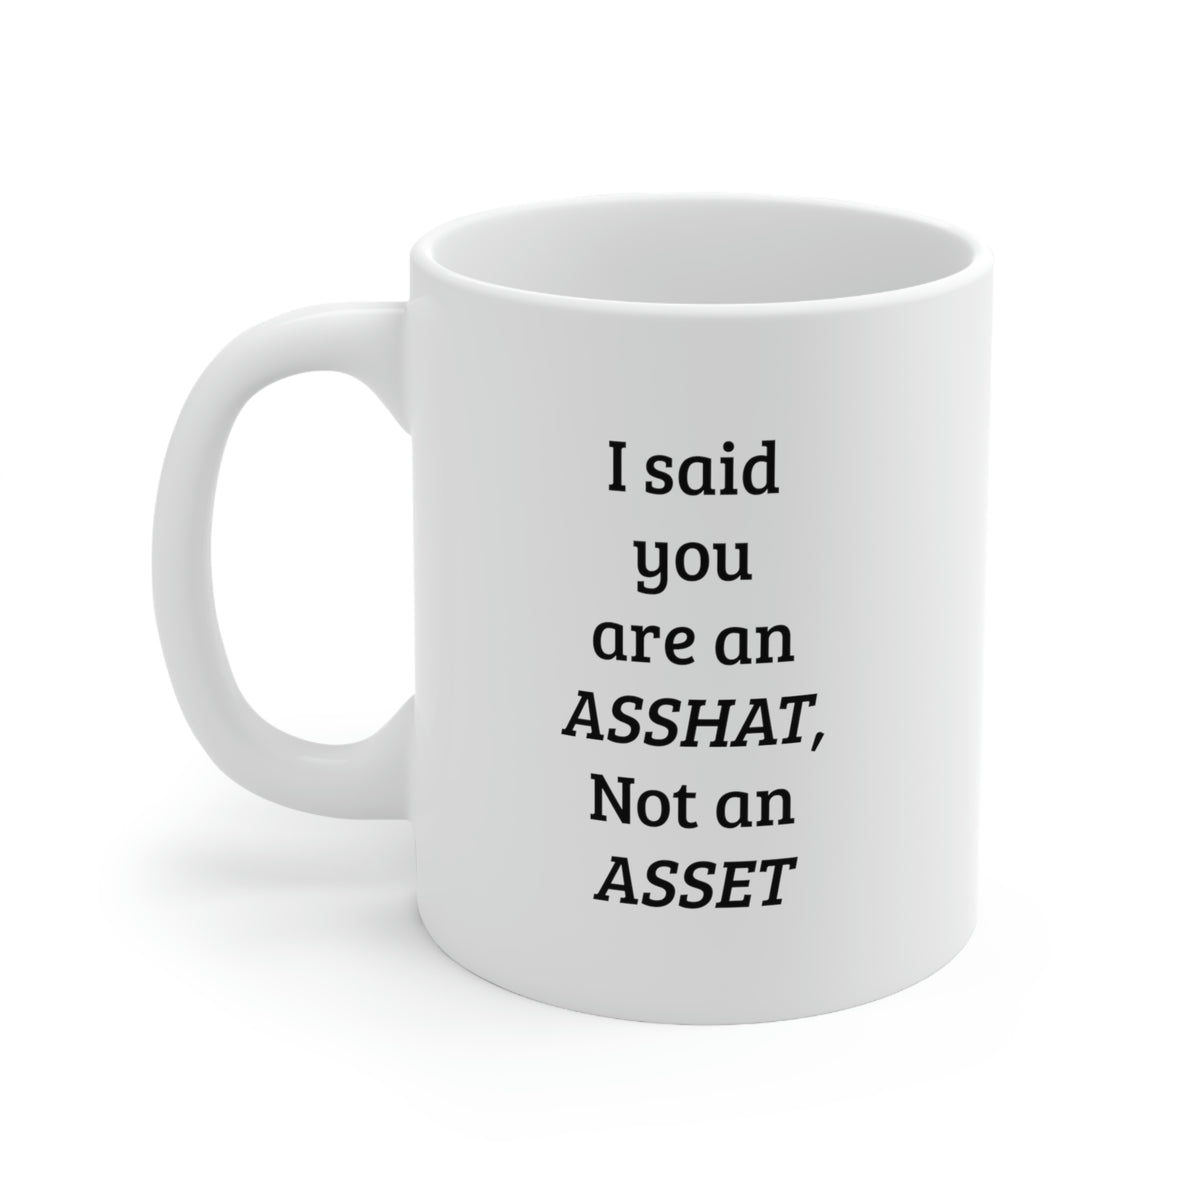 Proud Gifts Accountant Mug - I said you are an asshat, Not an asset Coffee Cup - Funny Tax Accounting Christmas and Sarcasm For Men Women Coworker Friend